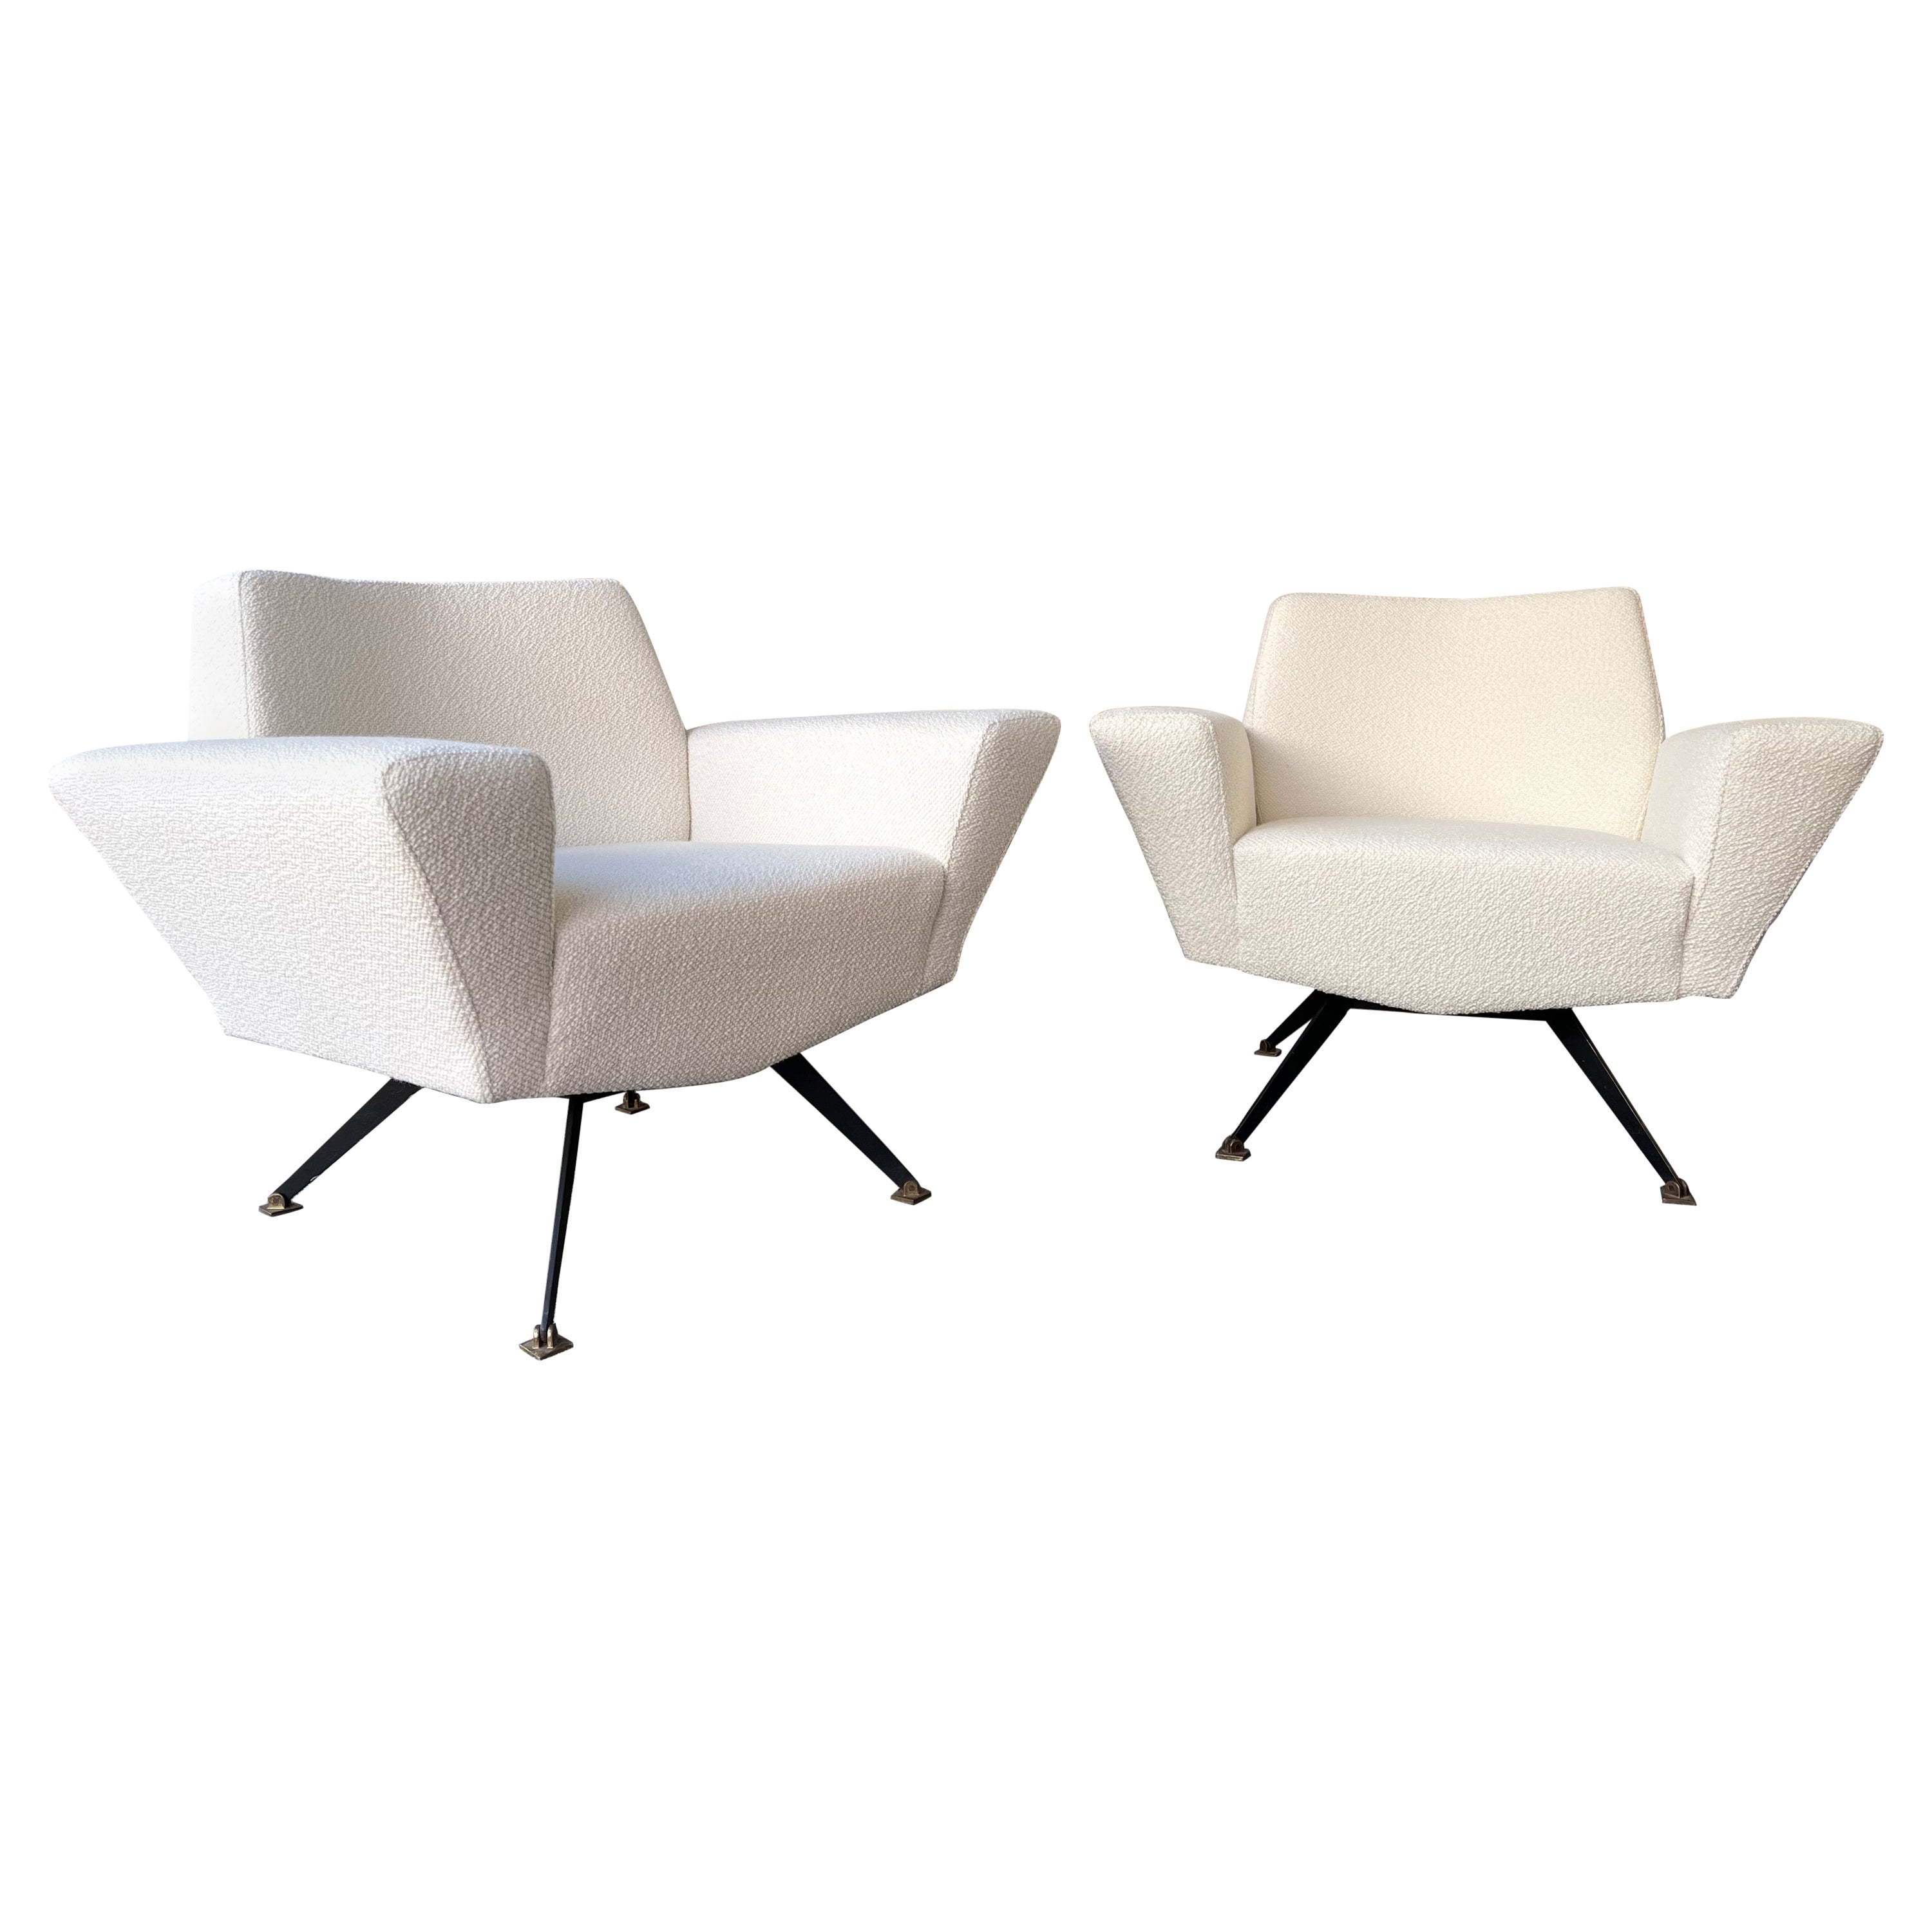 Pair of Armchairs M538 by Studio APA for Lenzi, Italy, 1960s